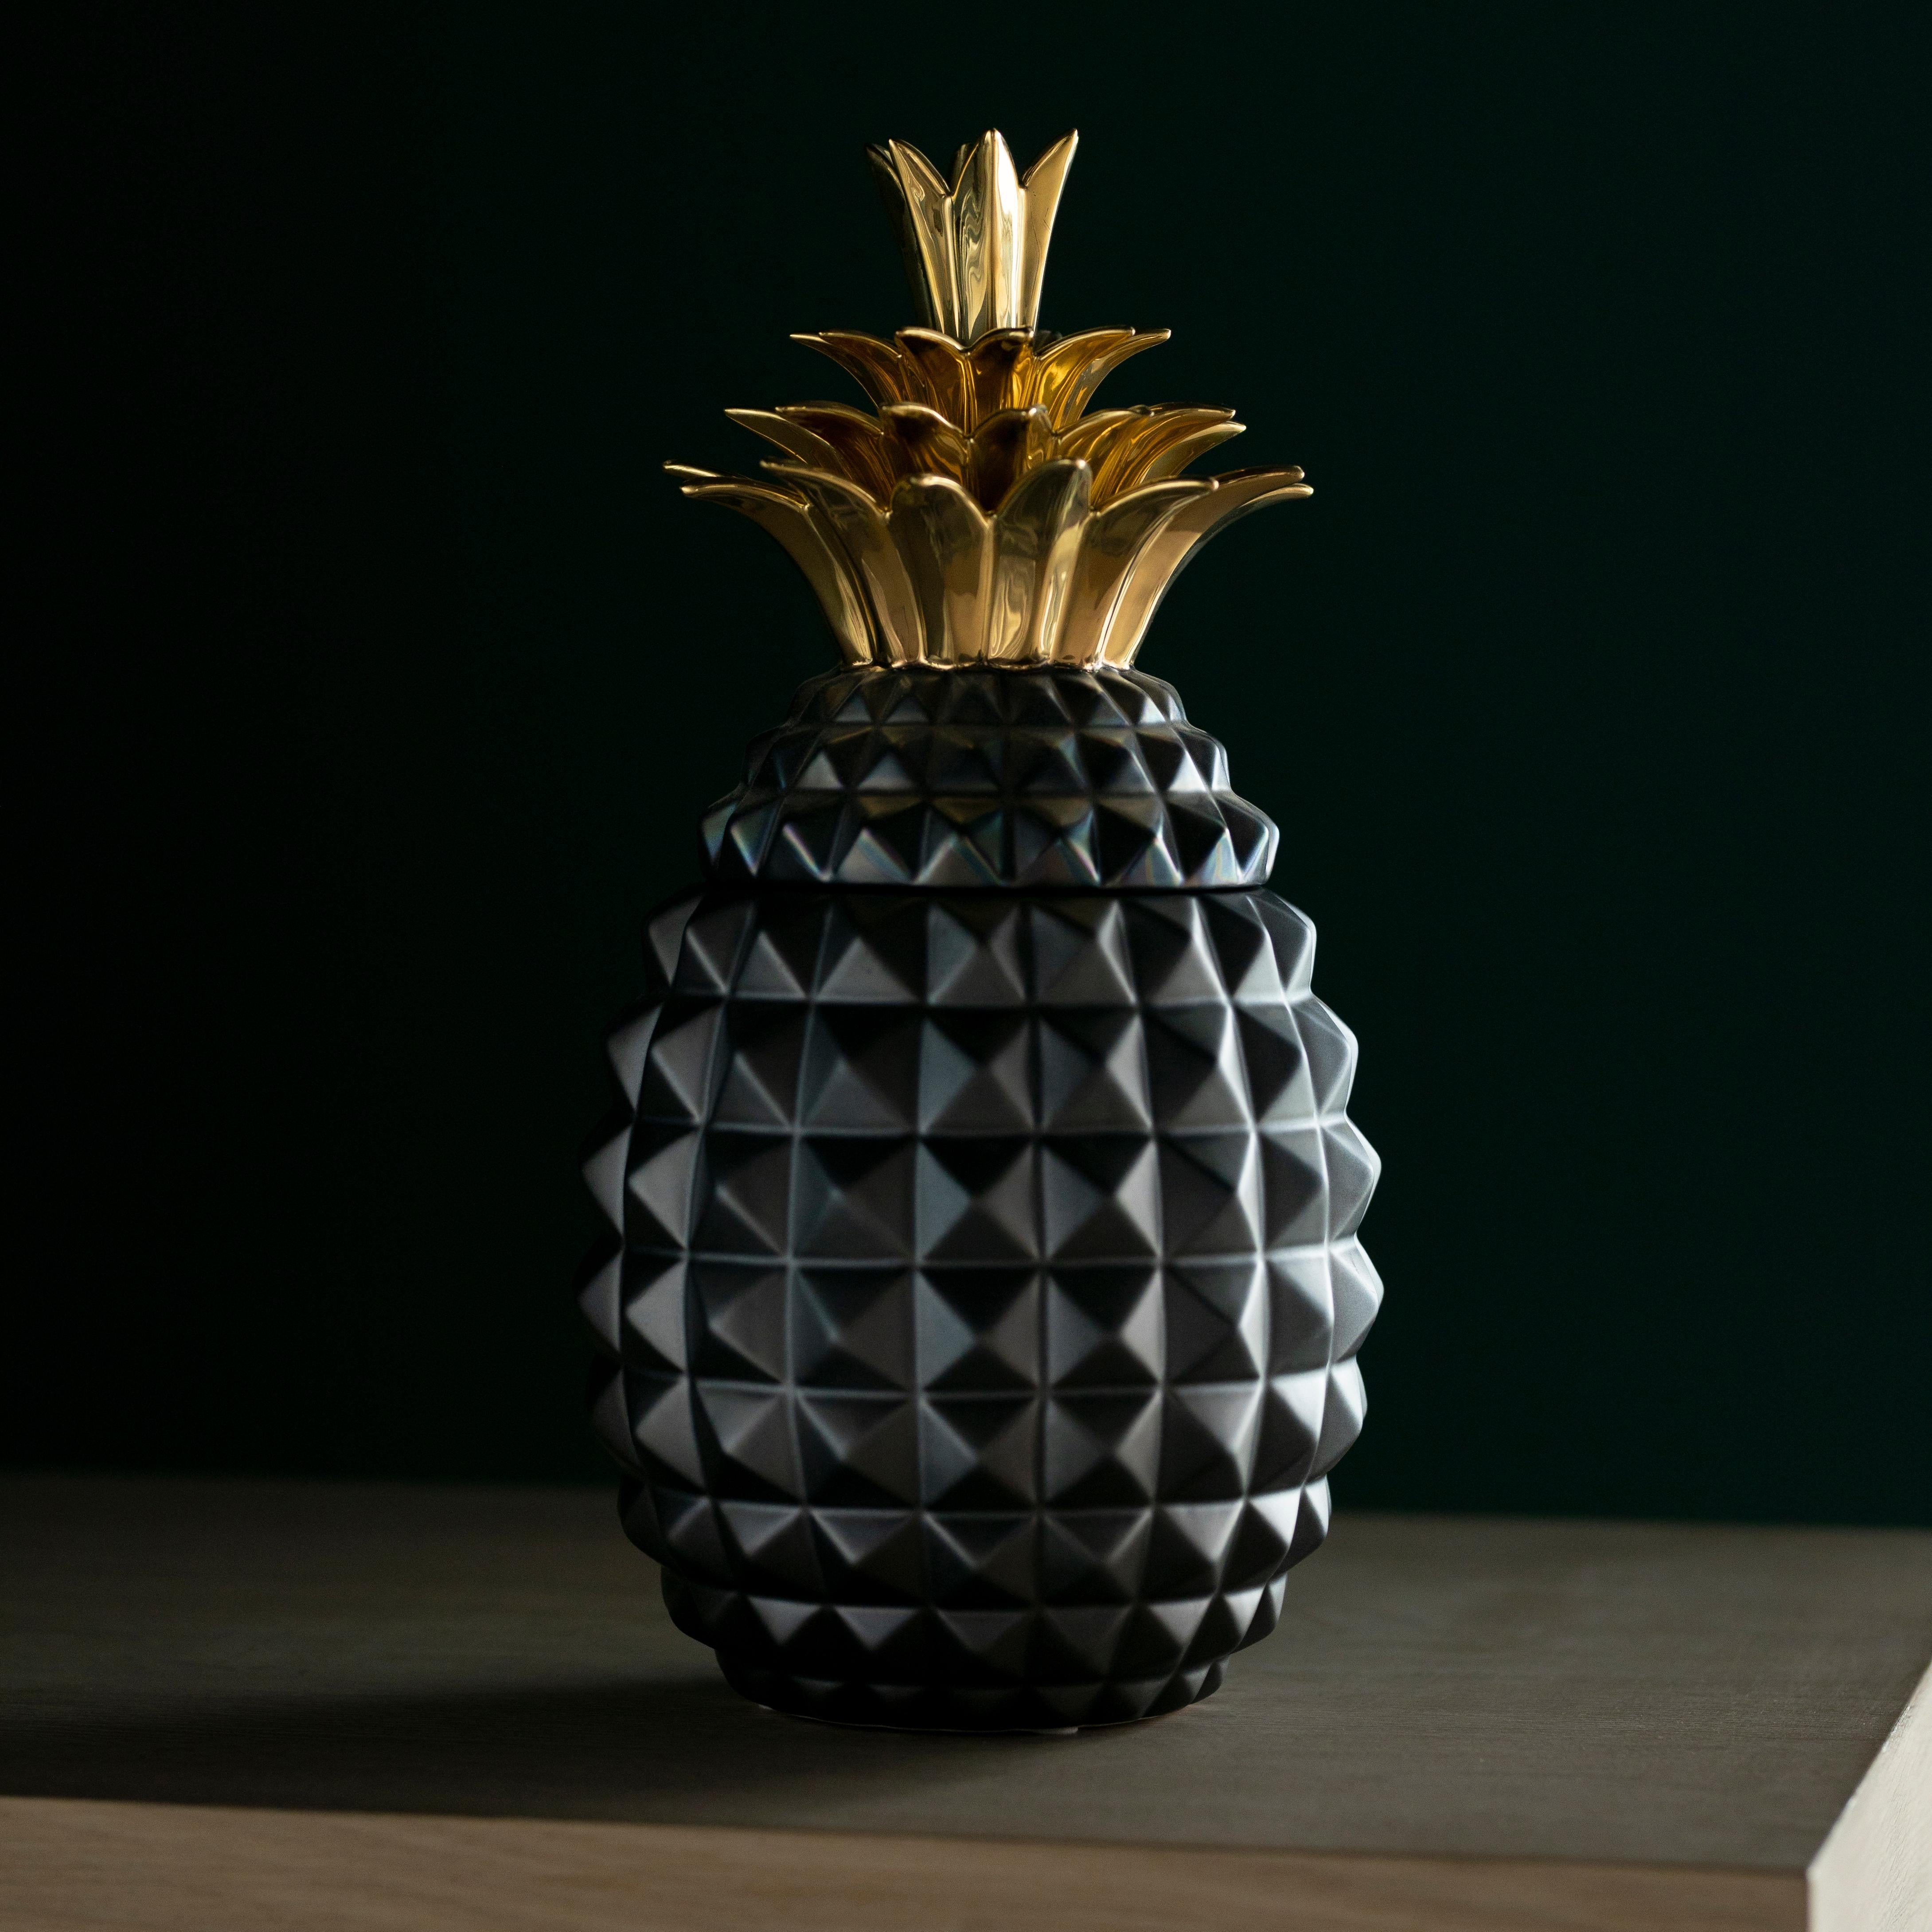 Pineapple Decorative Pots, Lusitanus Home Collection, Handcrafted in Portugal - Europe by Lusitanus Home.

This beautiful set includes two waterproof ceramic pots with lid, perfect to be displayed together and enrich your room decor.  Each piece has